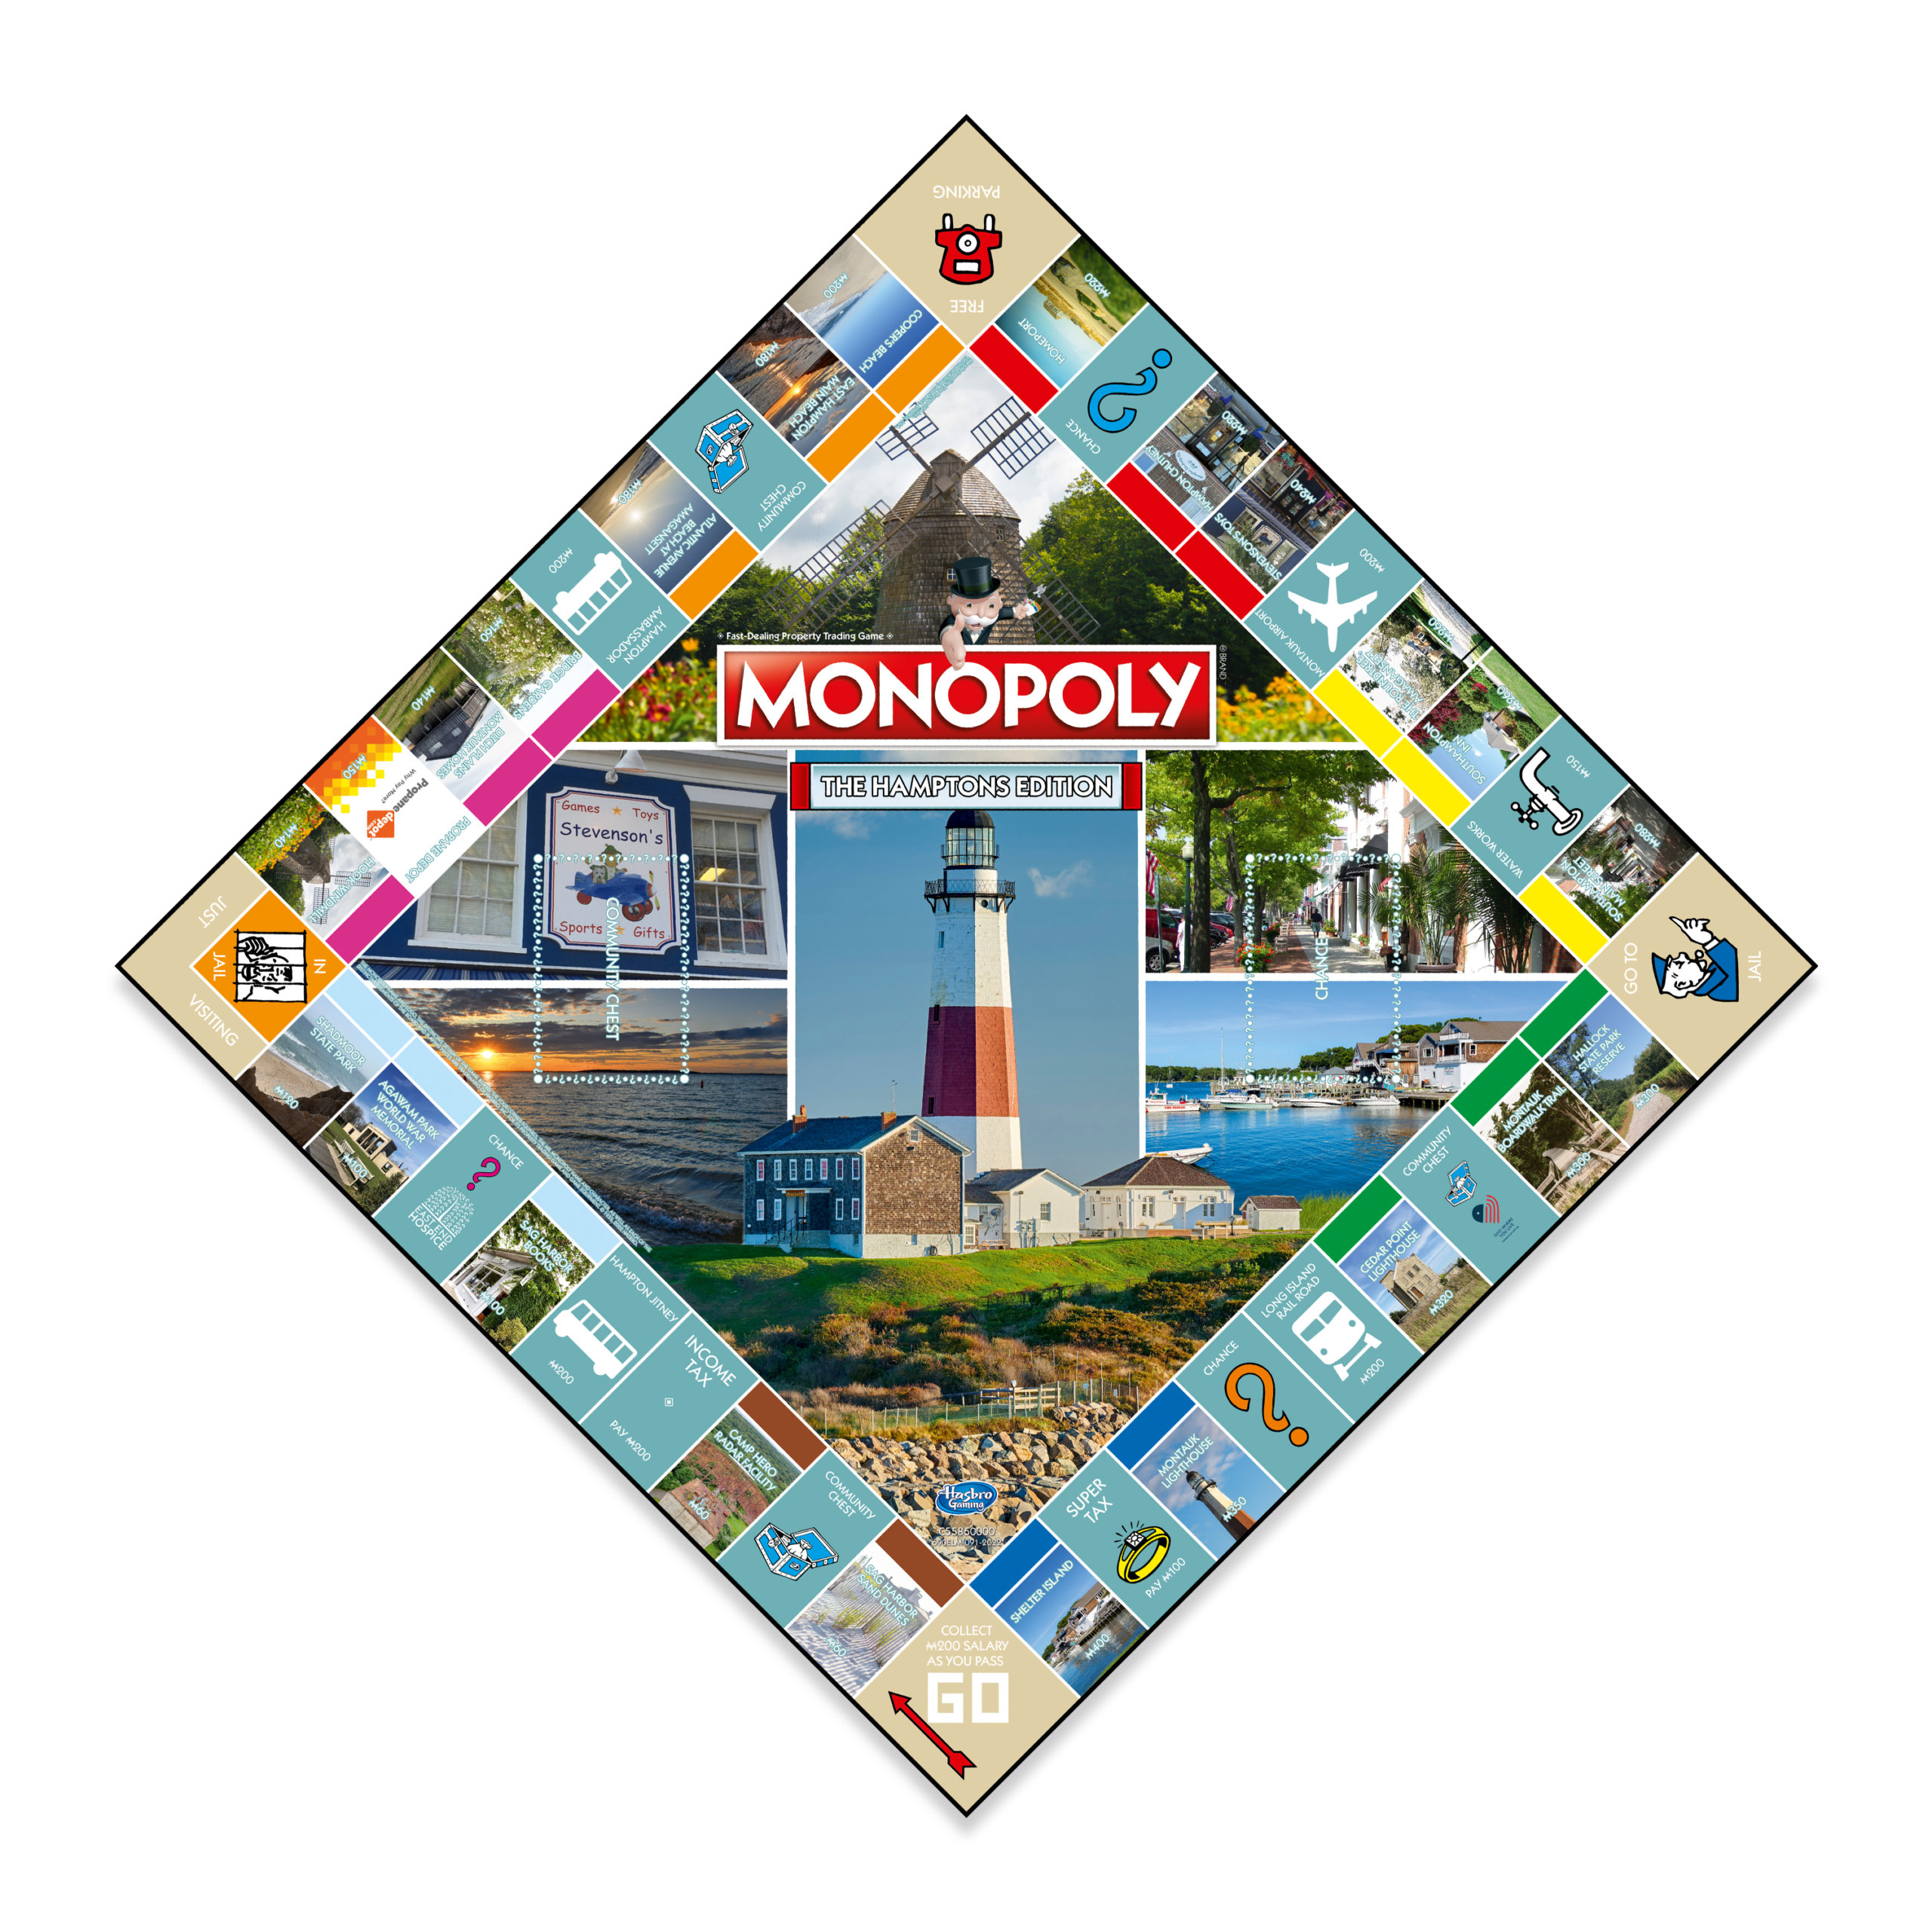 Monopoly The Hamptons Edition board